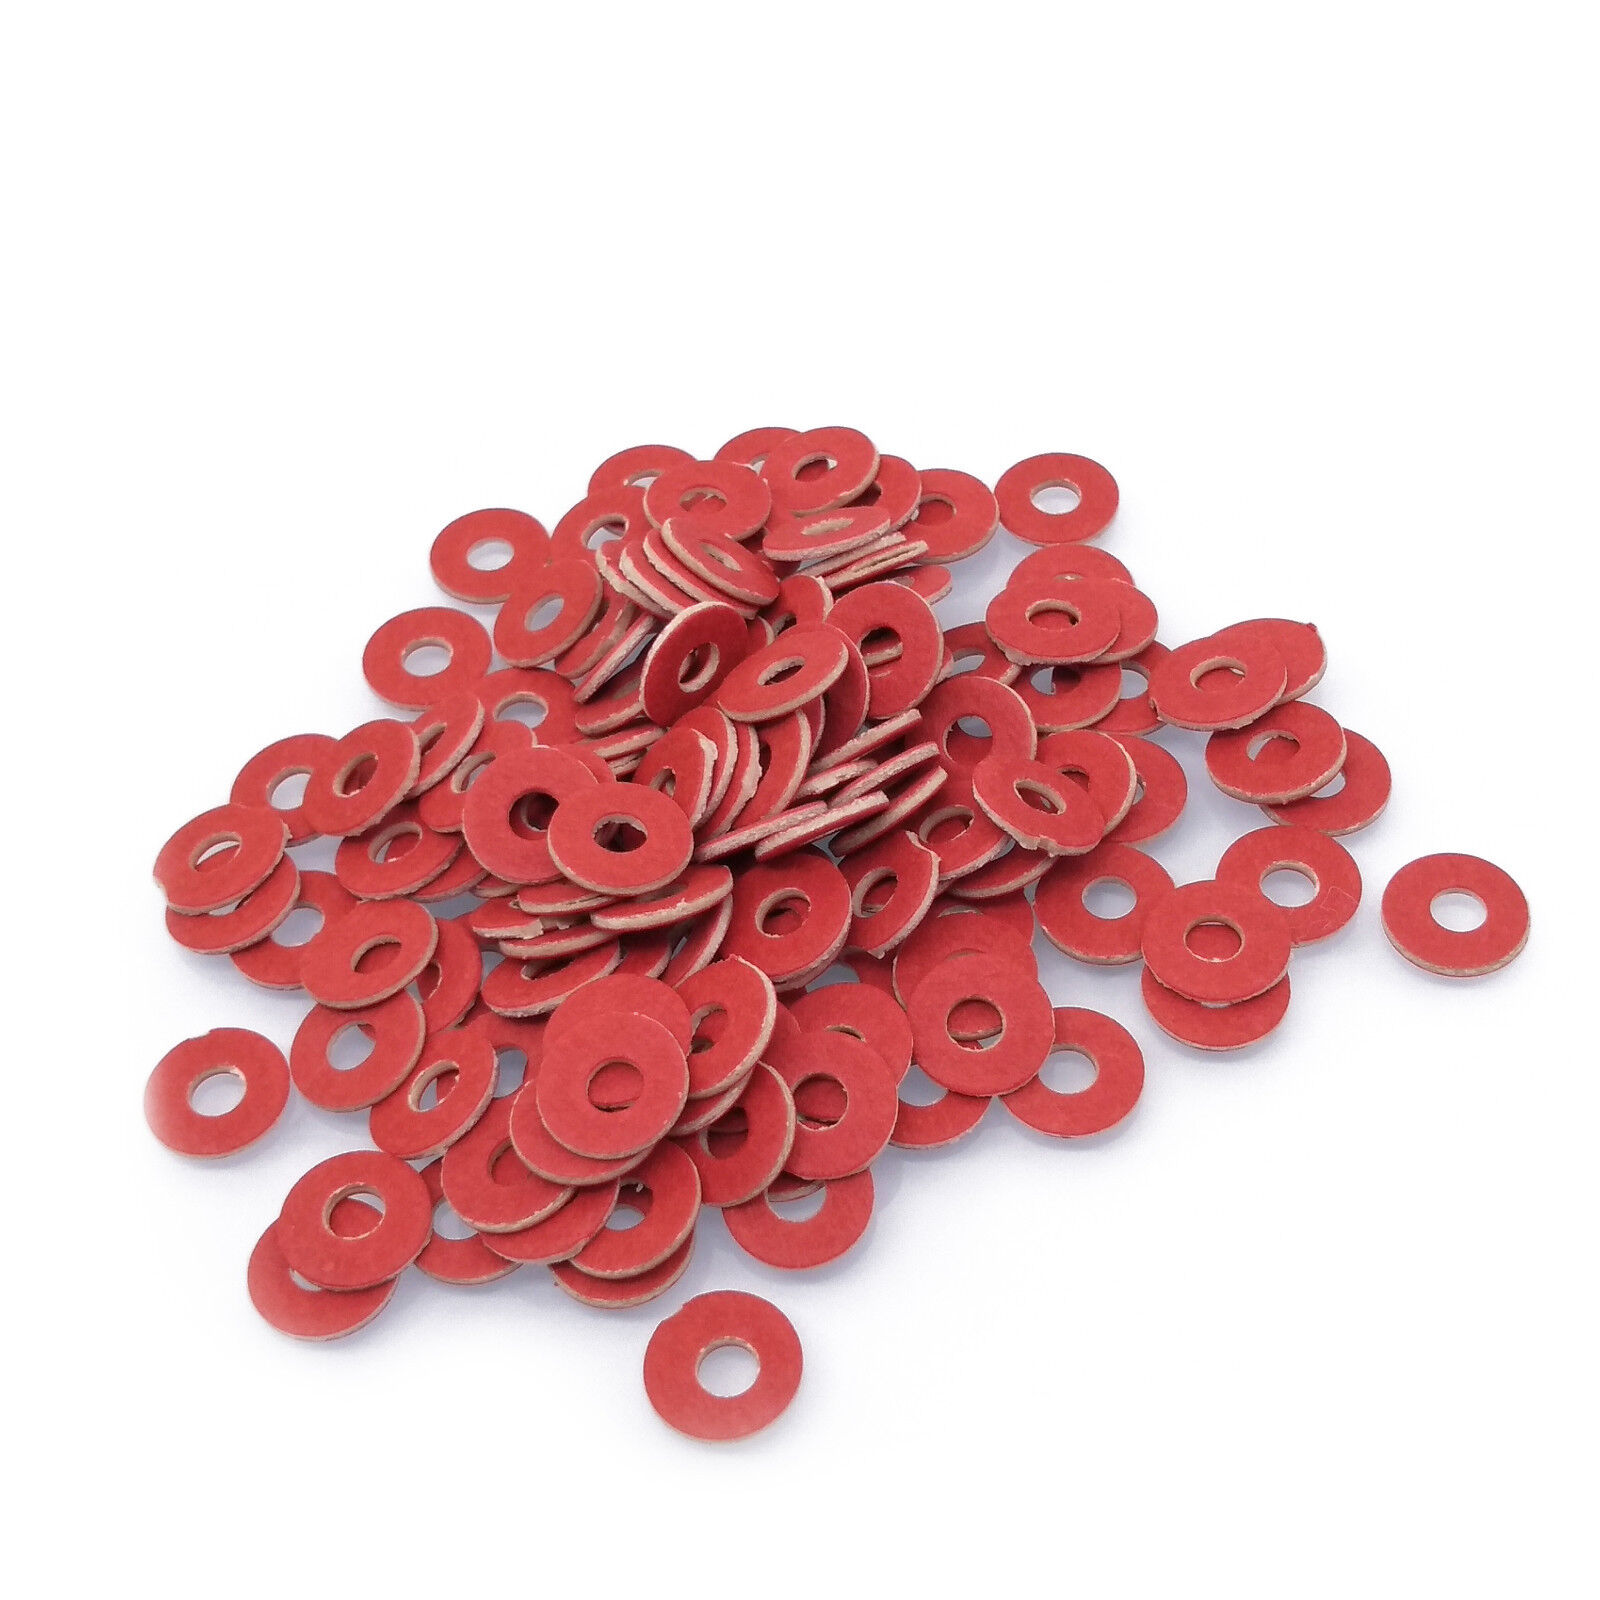 US Stock 200pc Motherboard Insulating Fiber Washers For M3 6/32 Kadee 208 Washer